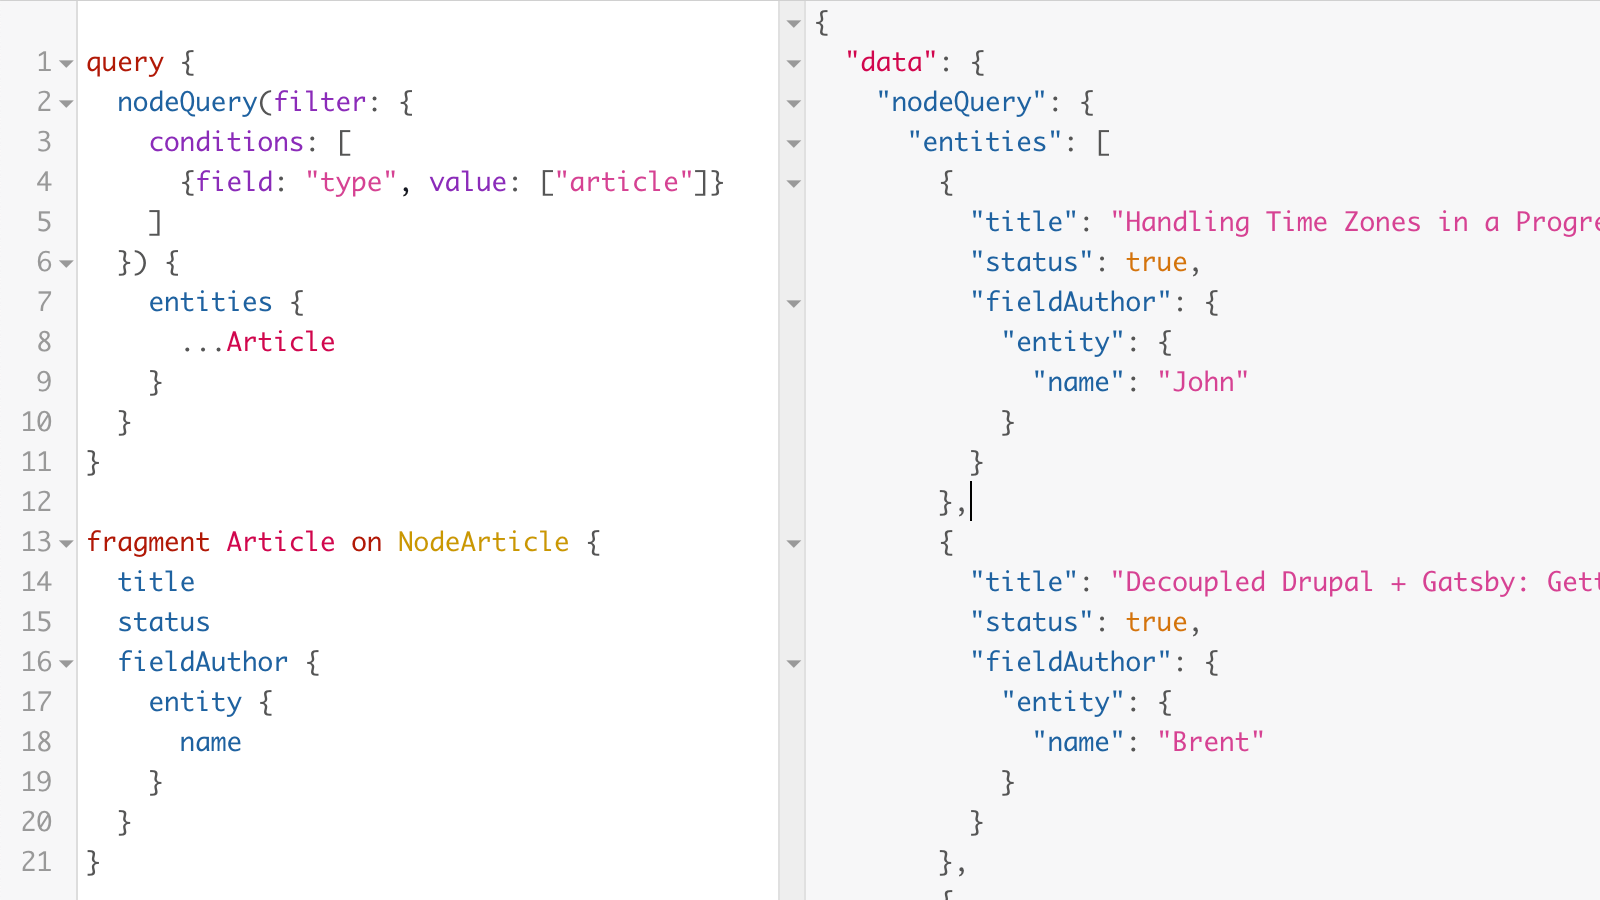 GraphiQL substituting with a fragment